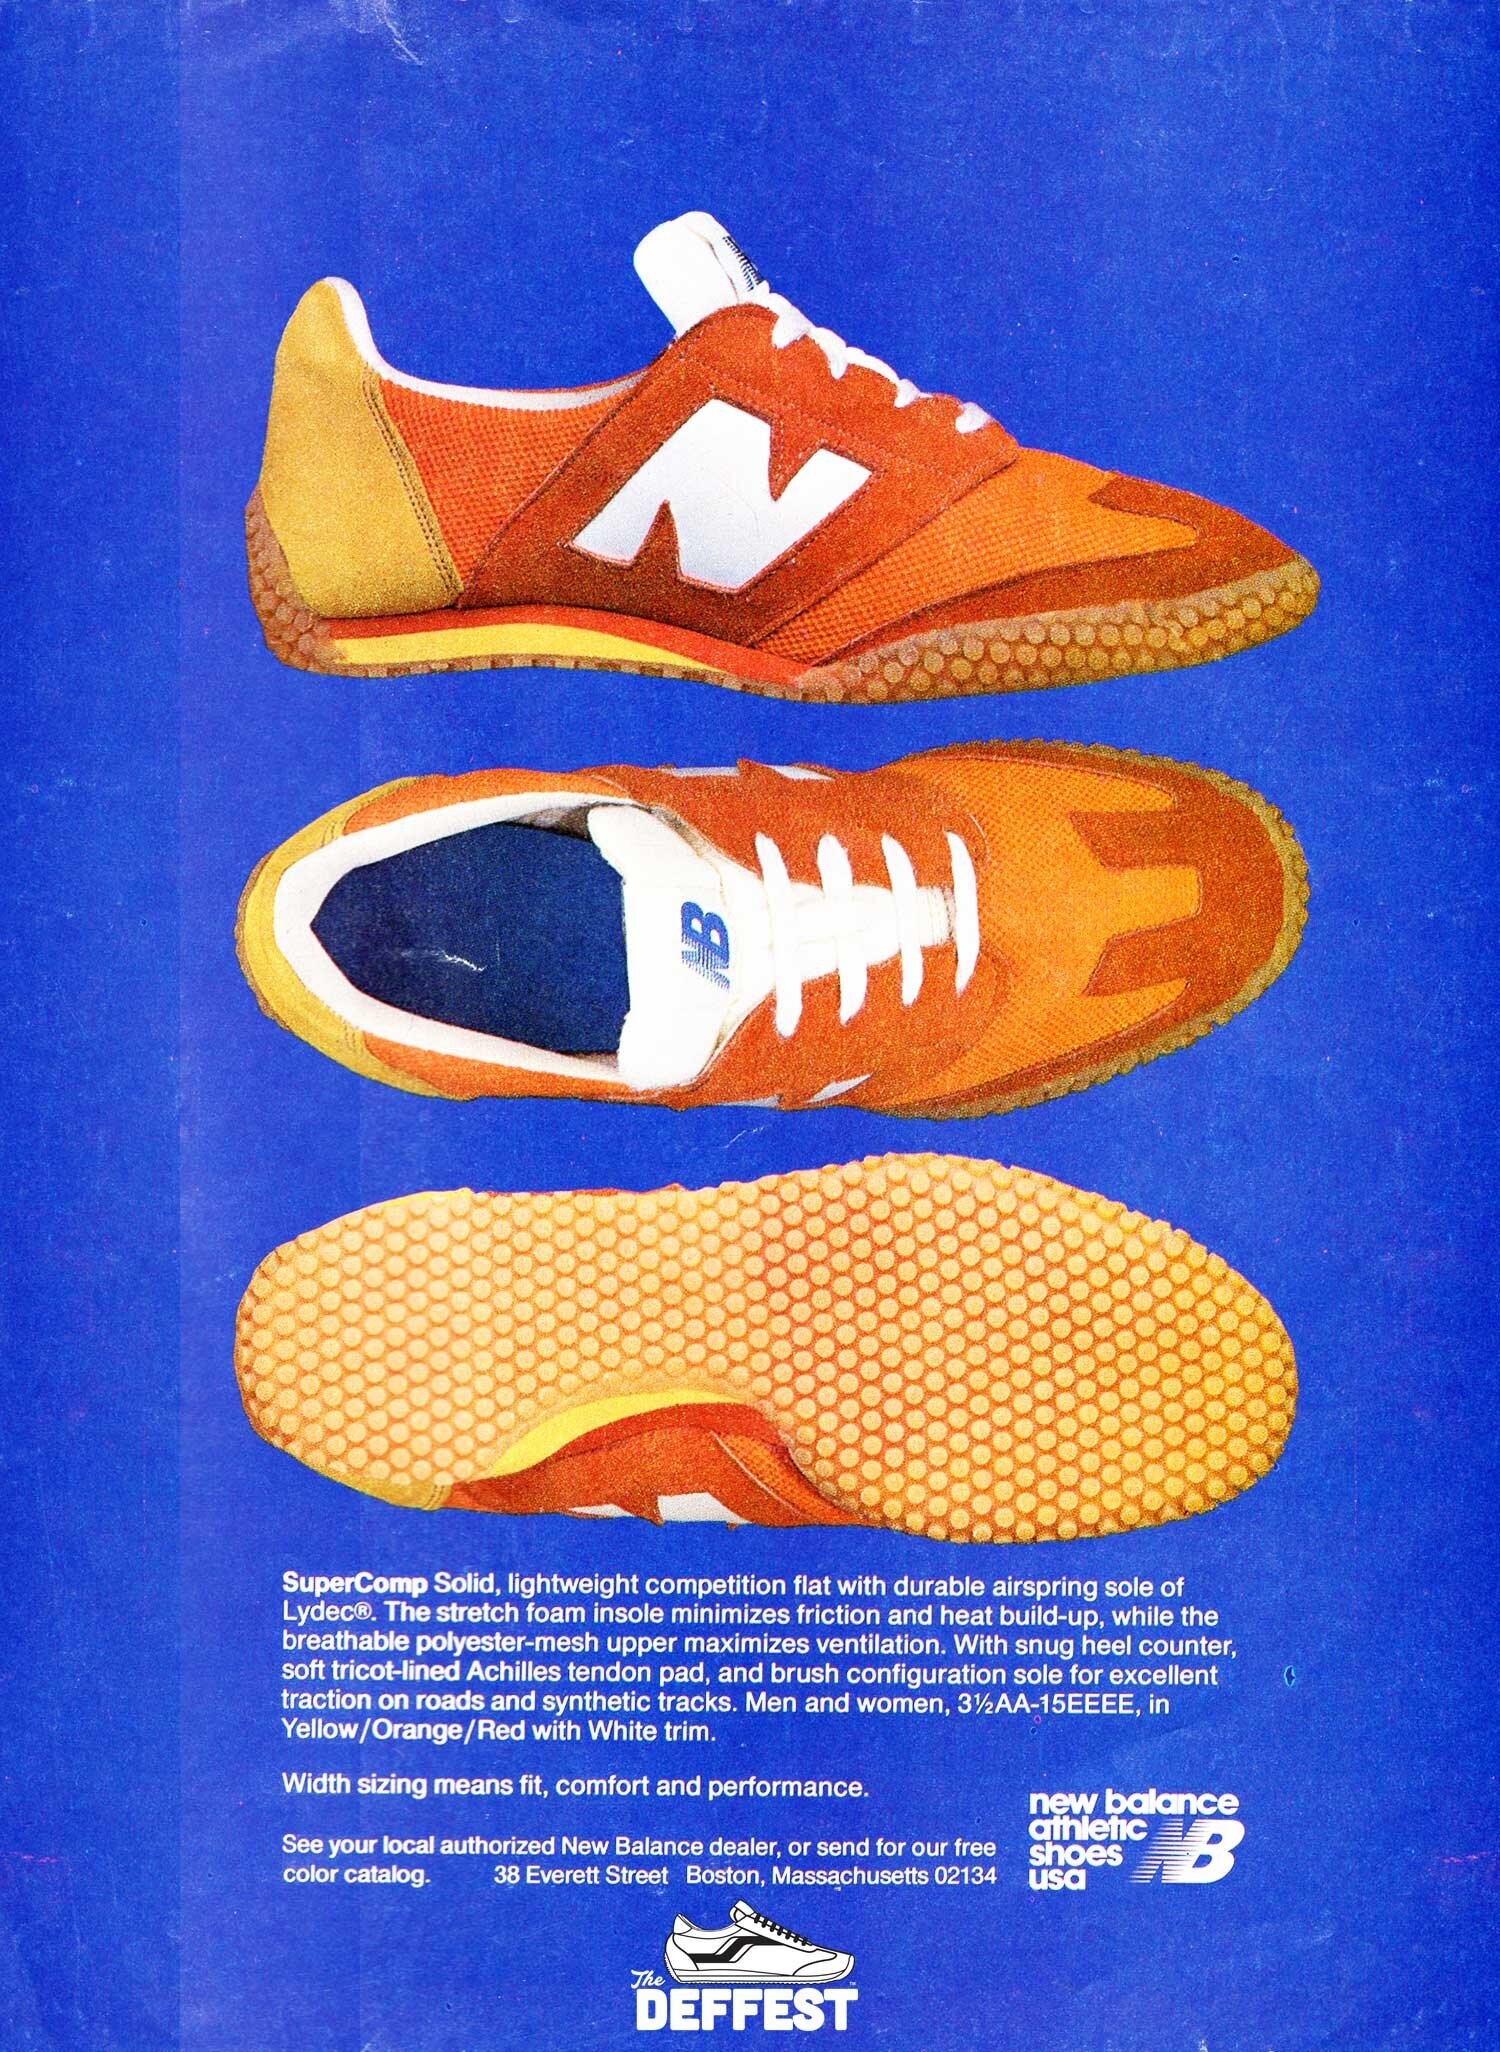 New Balance 355 — The Deffest®. A vintage and retro sneaker blog. — Blog